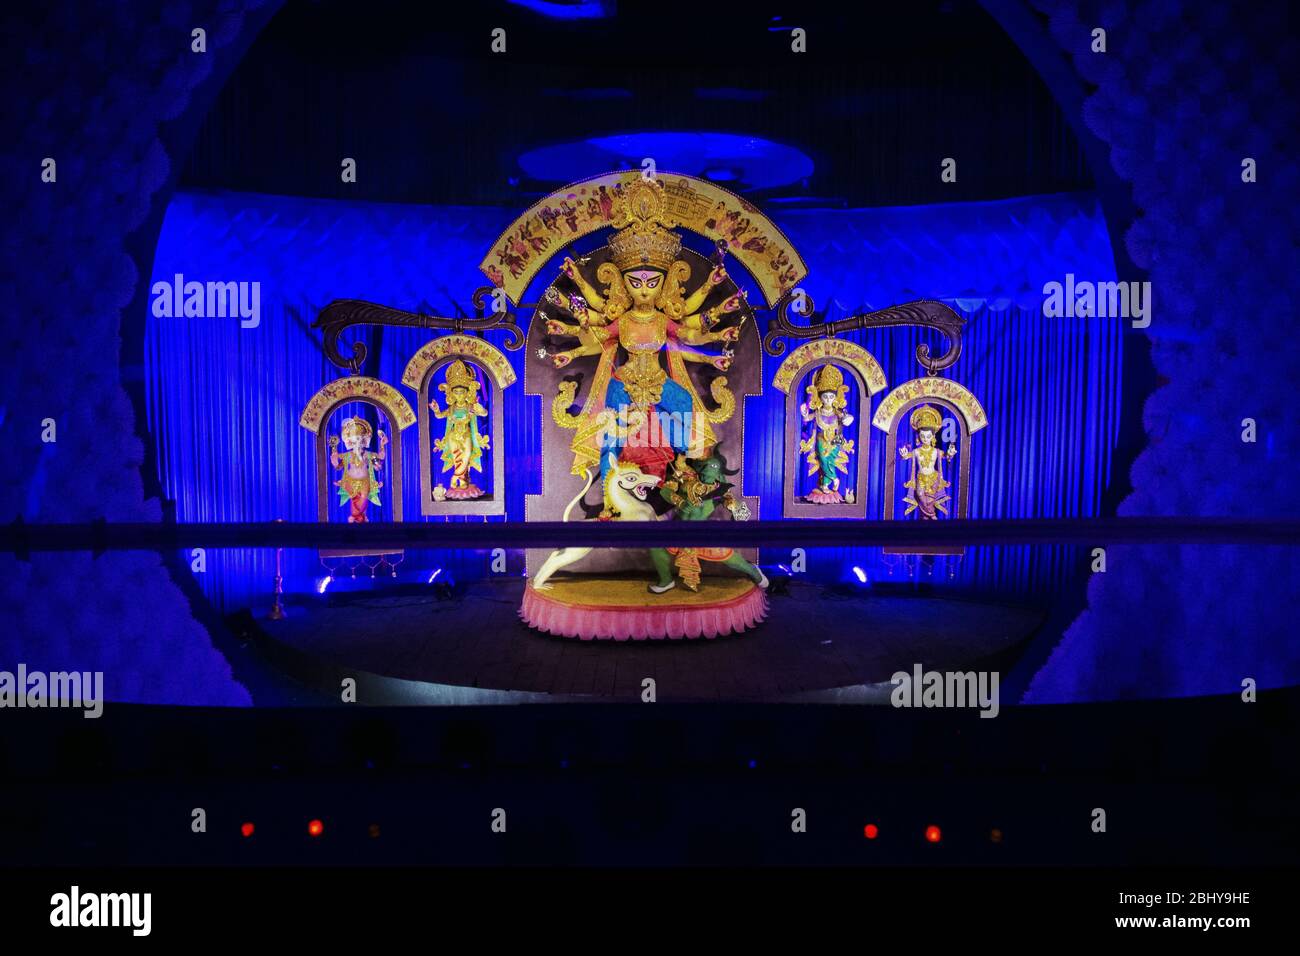 Durga In Several Theme In Several Pandals Stock Photo